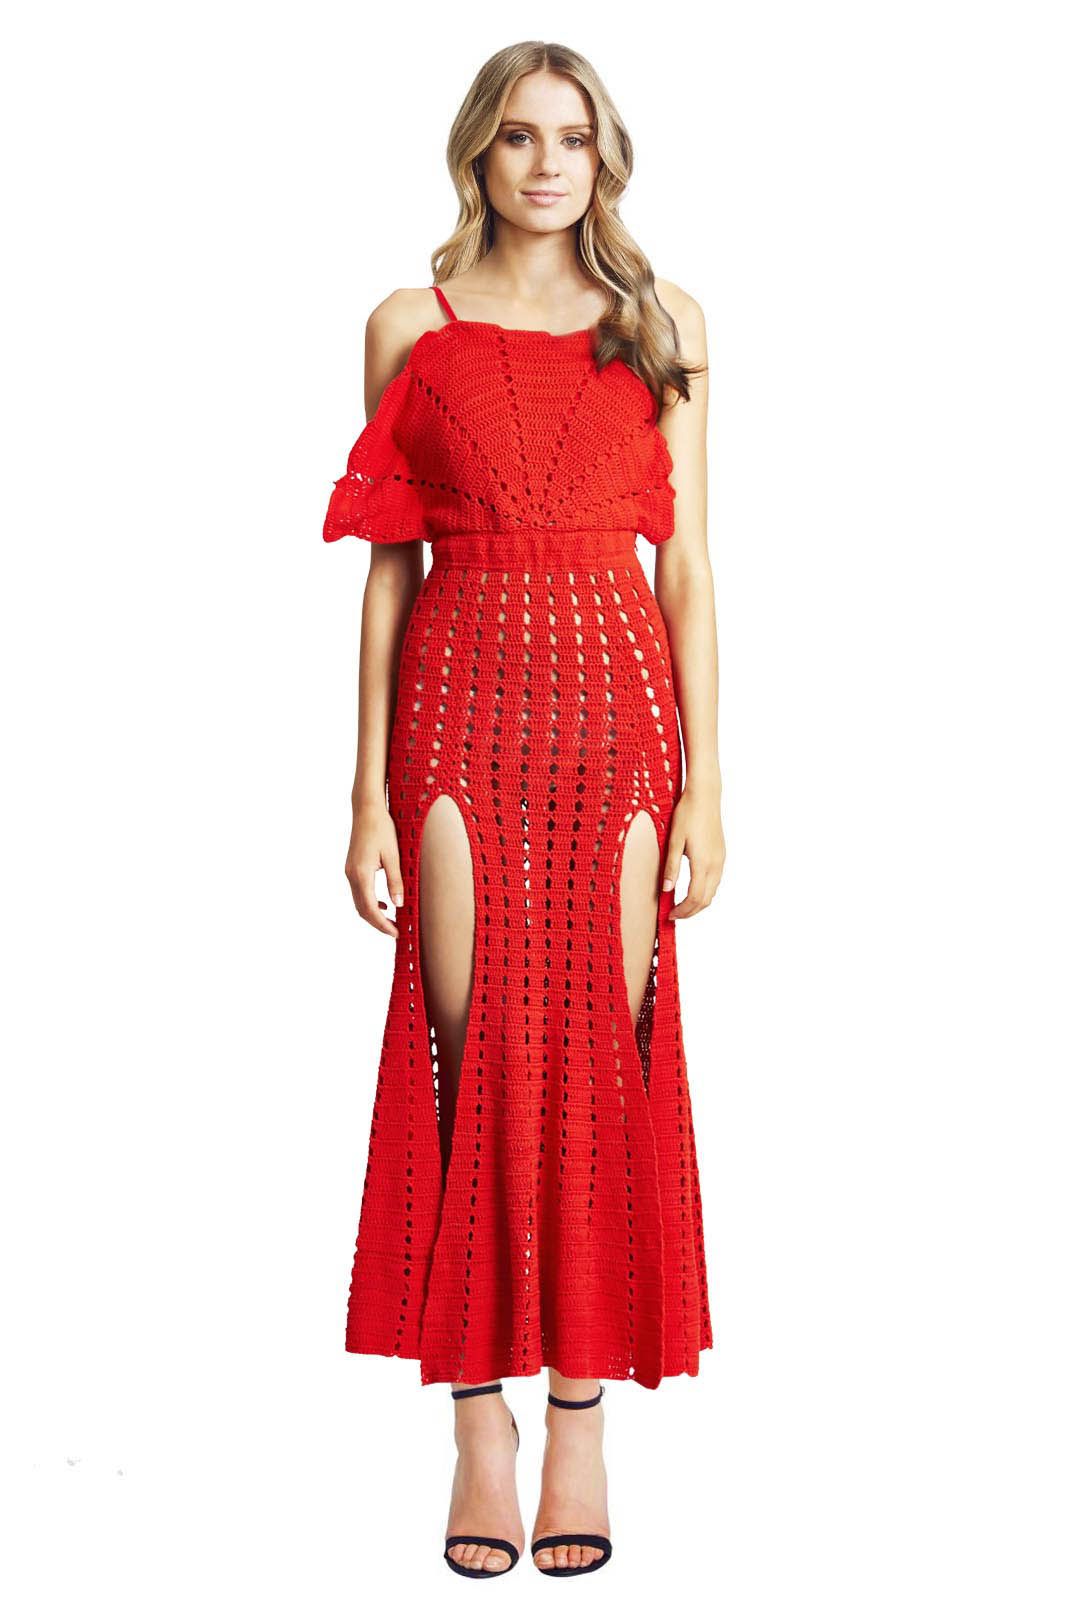 Alice McCall - Room is on Fire Dress - Red - Front